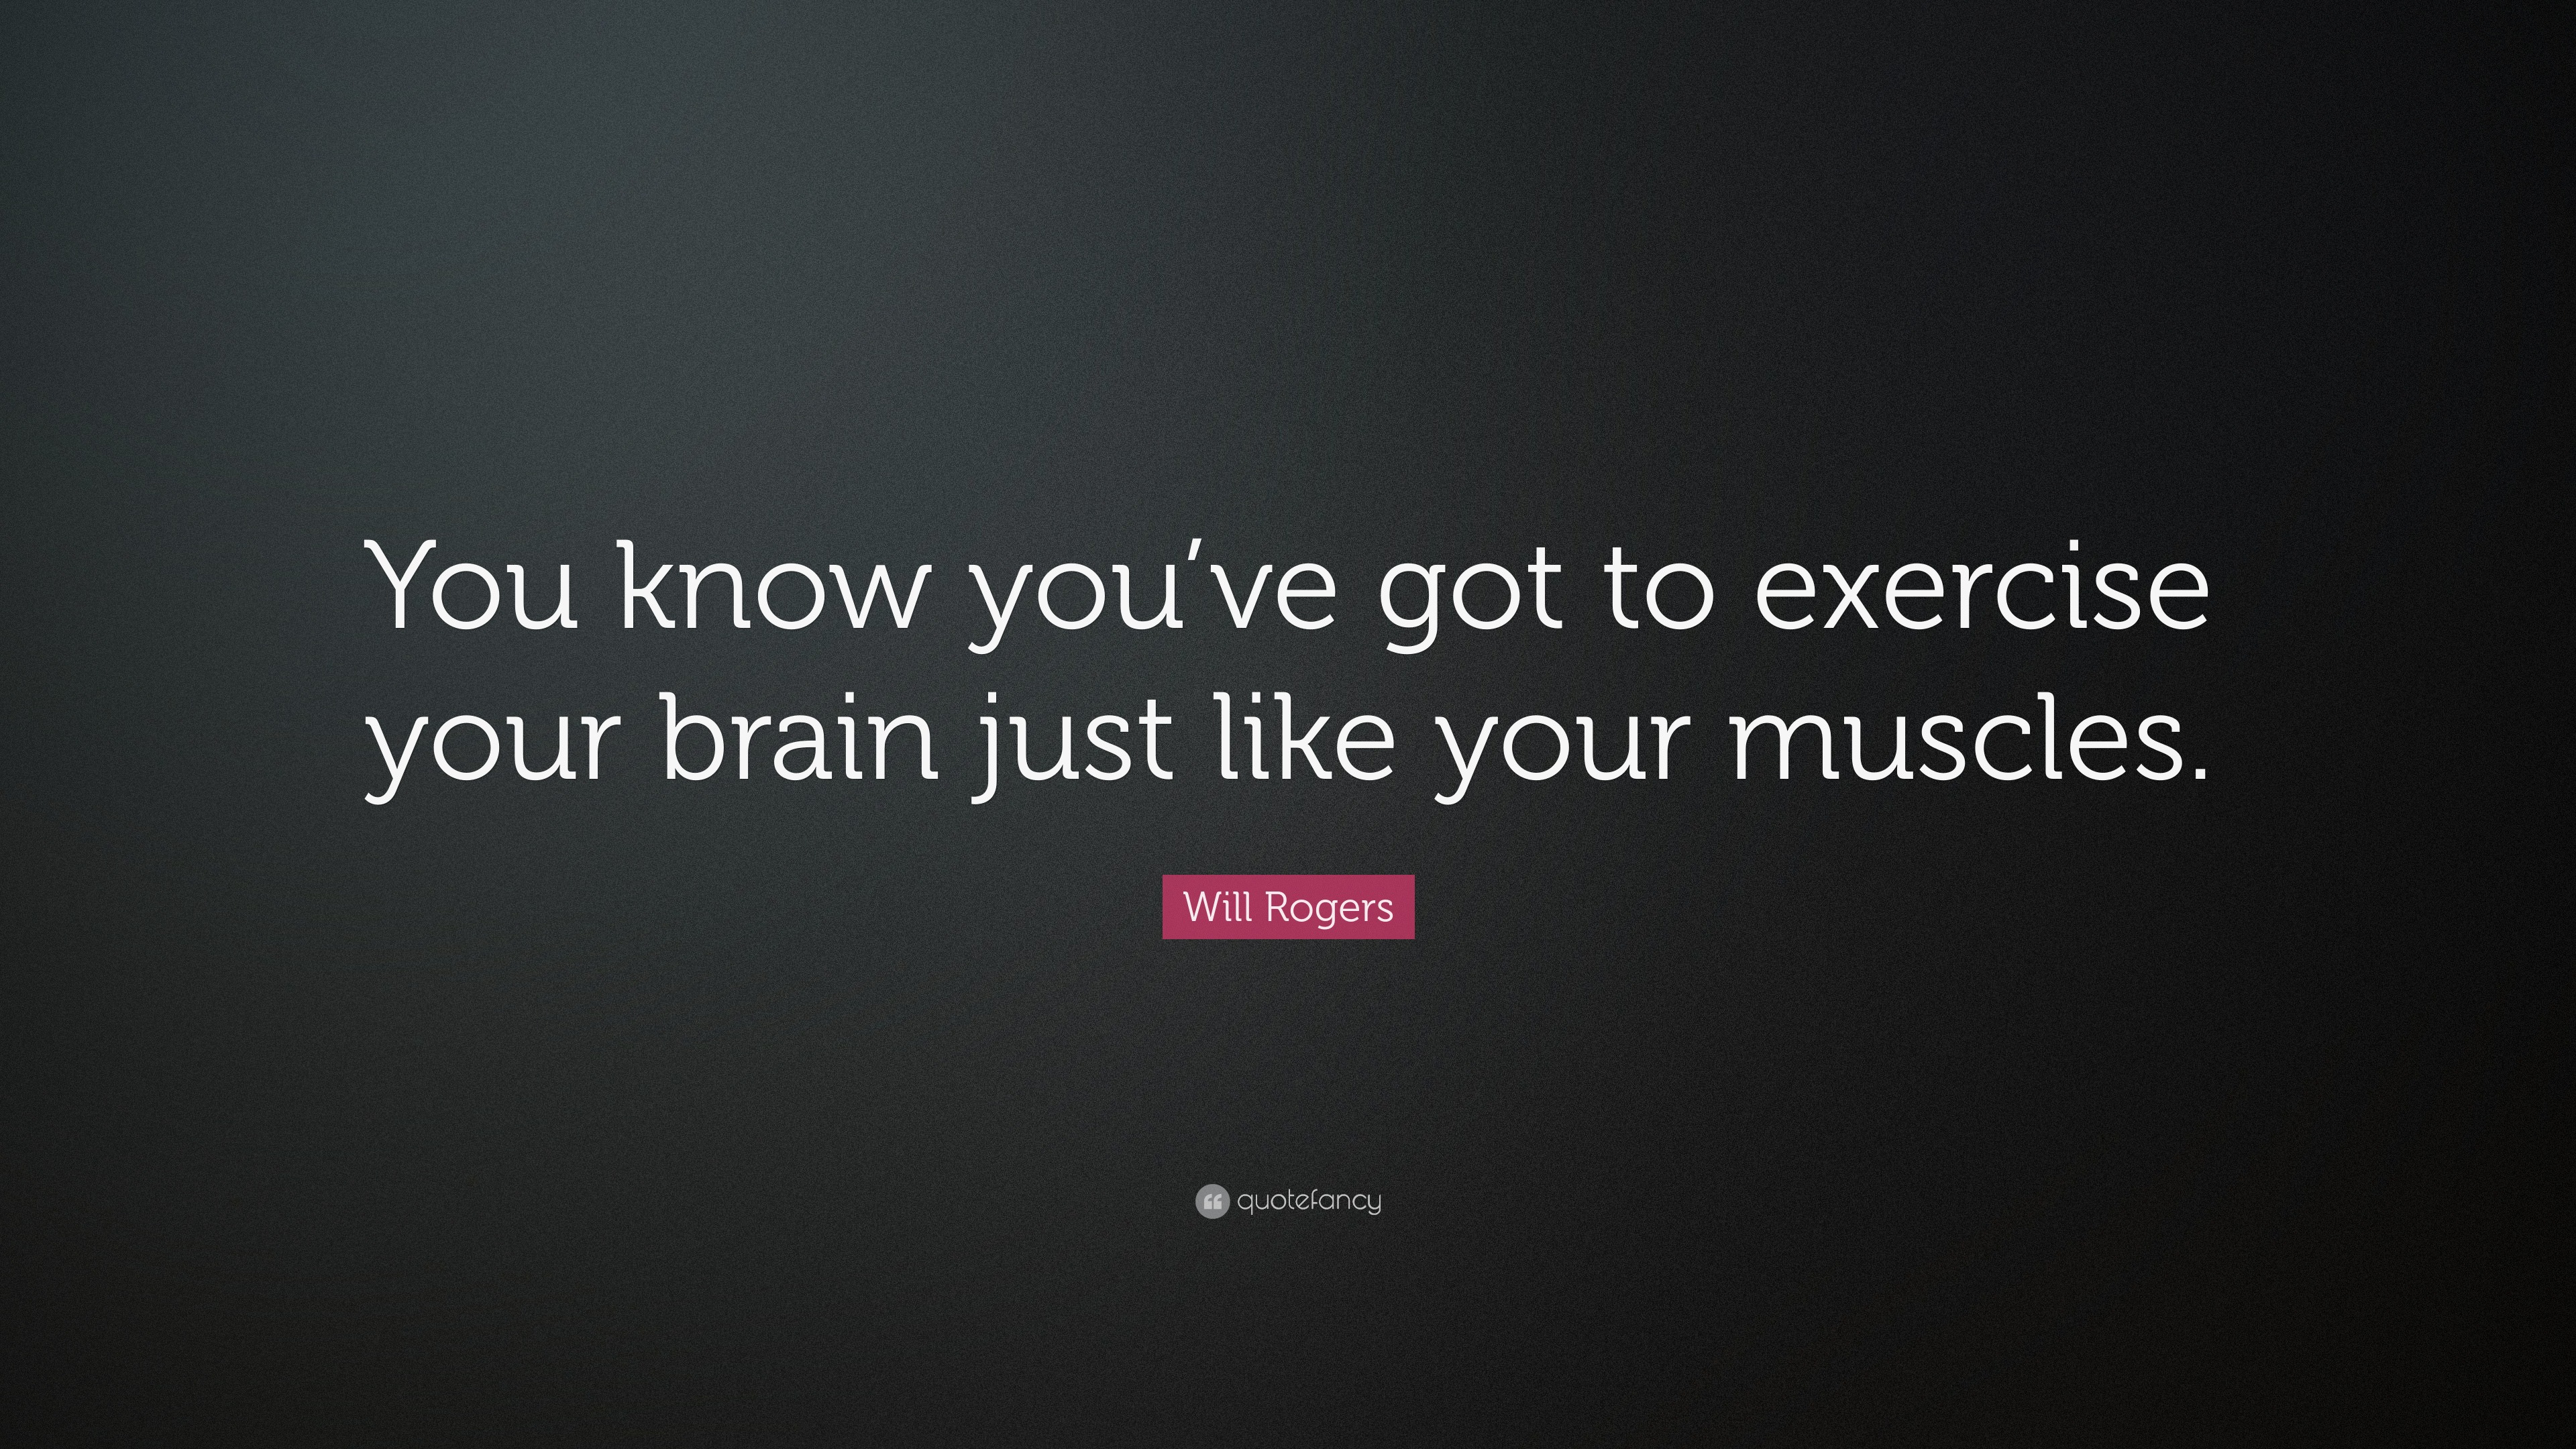 Will Rogers Quote: “You know you’ve got to exercise your brain just ...